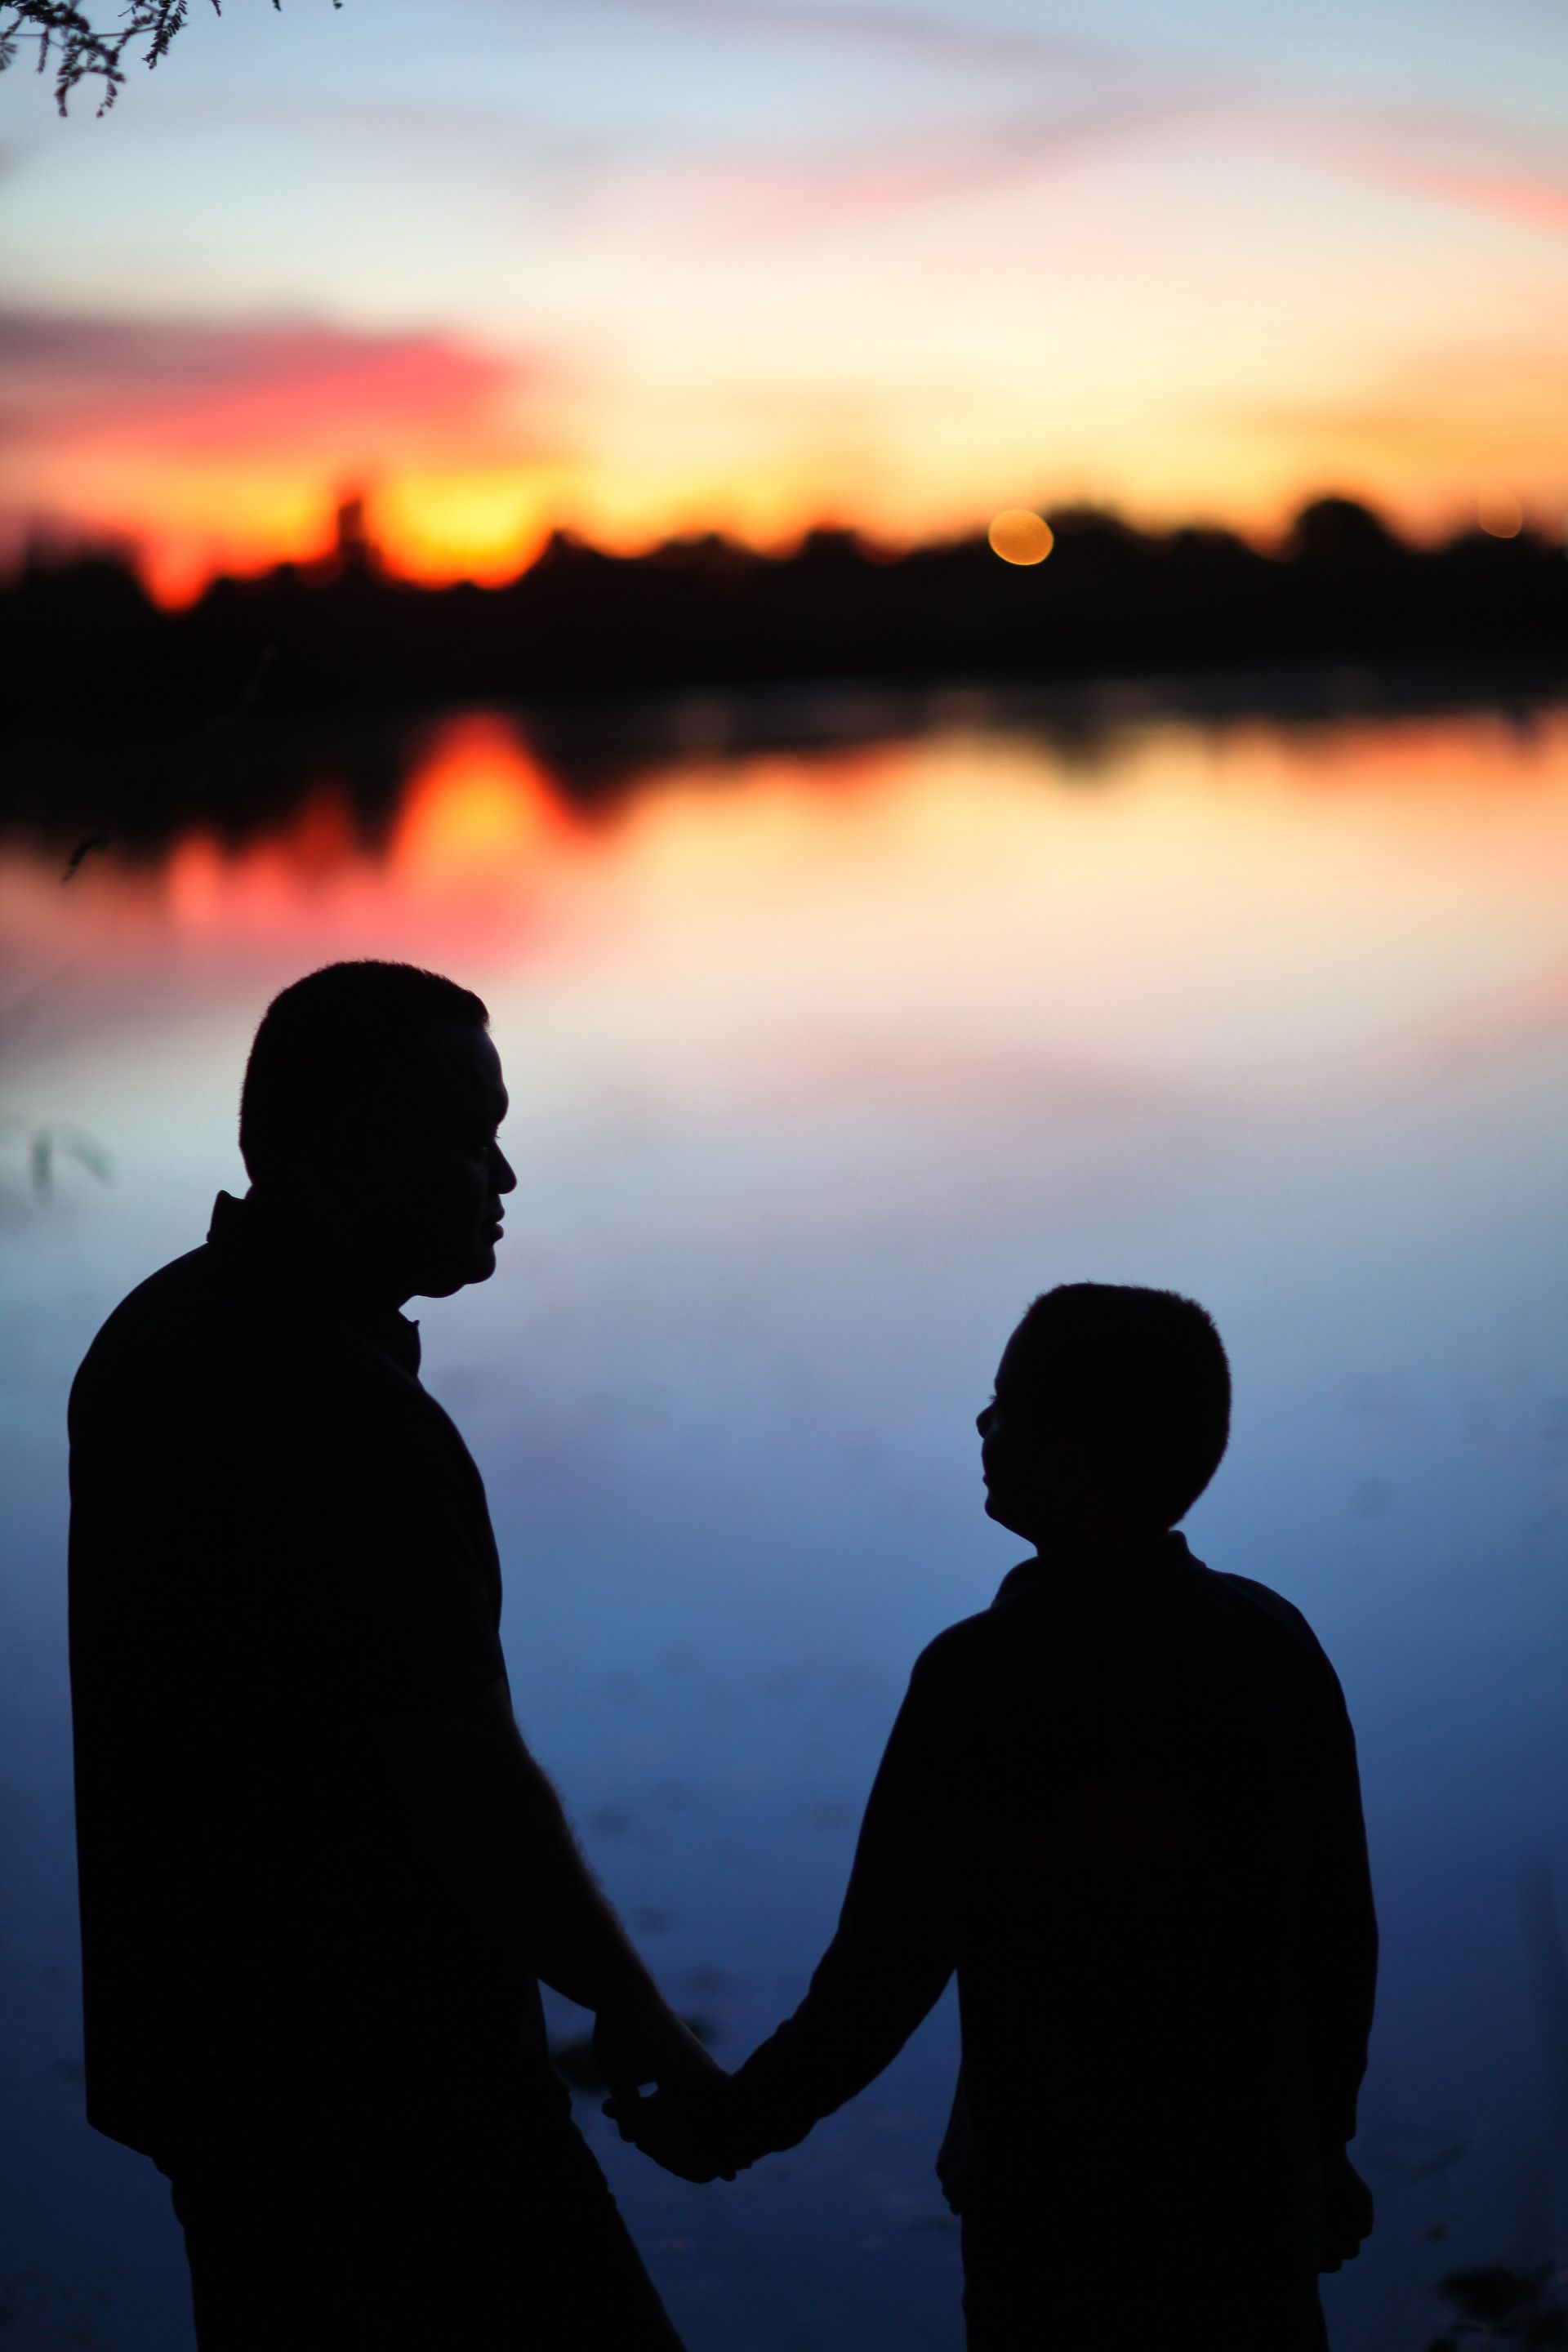 A father and son walk around a lake at sunset.